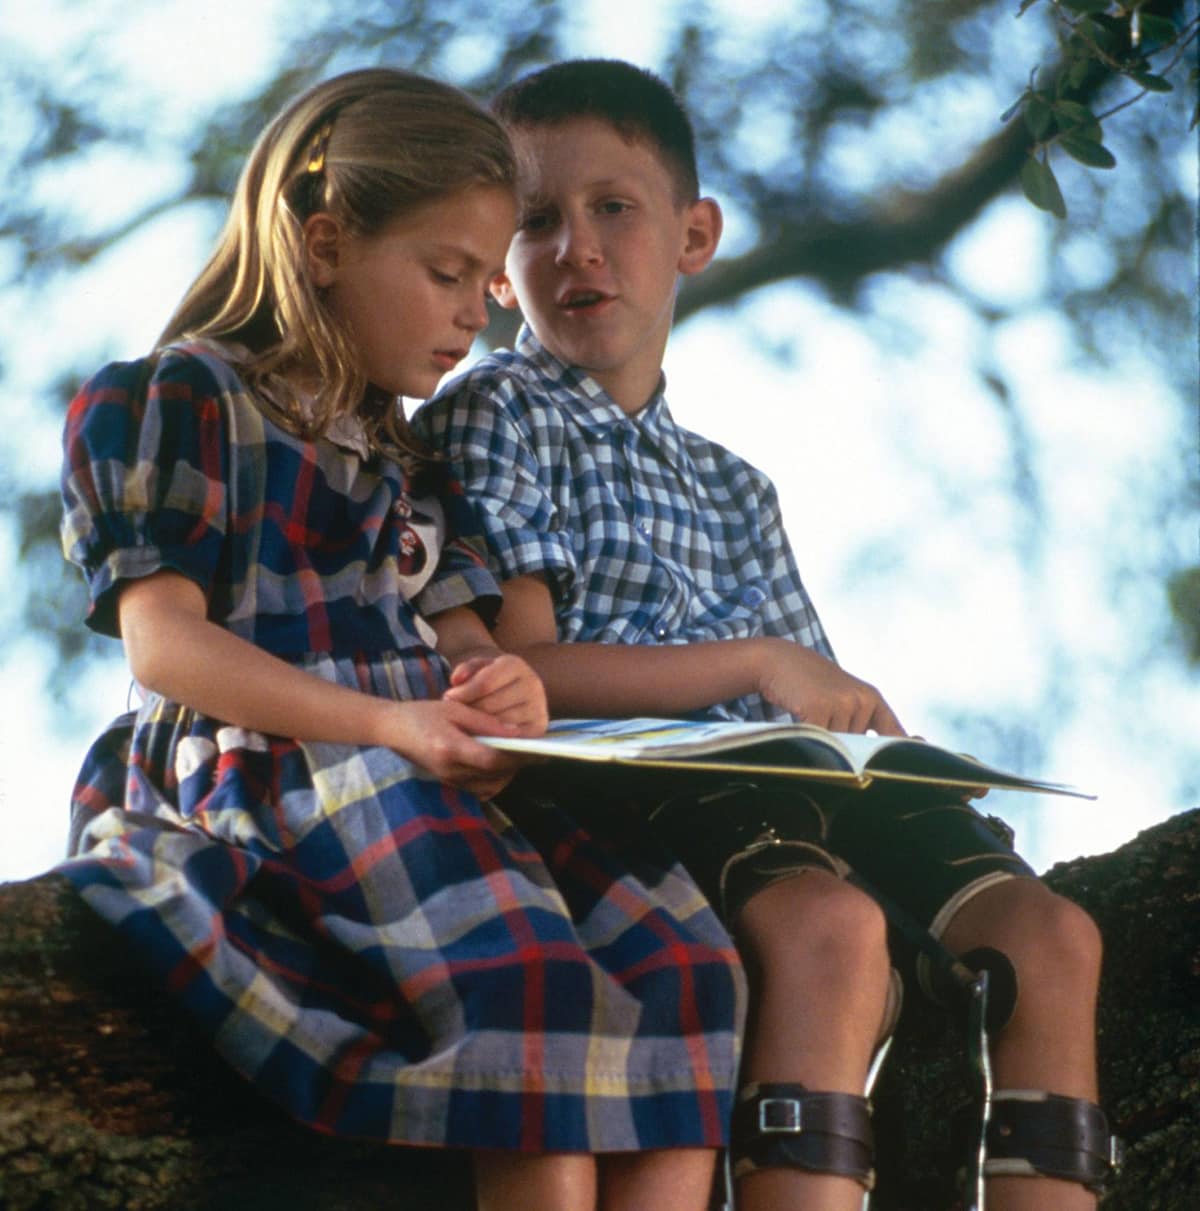 Hanna Hall and Michael Conner Humphreys as young Jenny Curran and Forrest Gump in the 1994 comedy-drama film